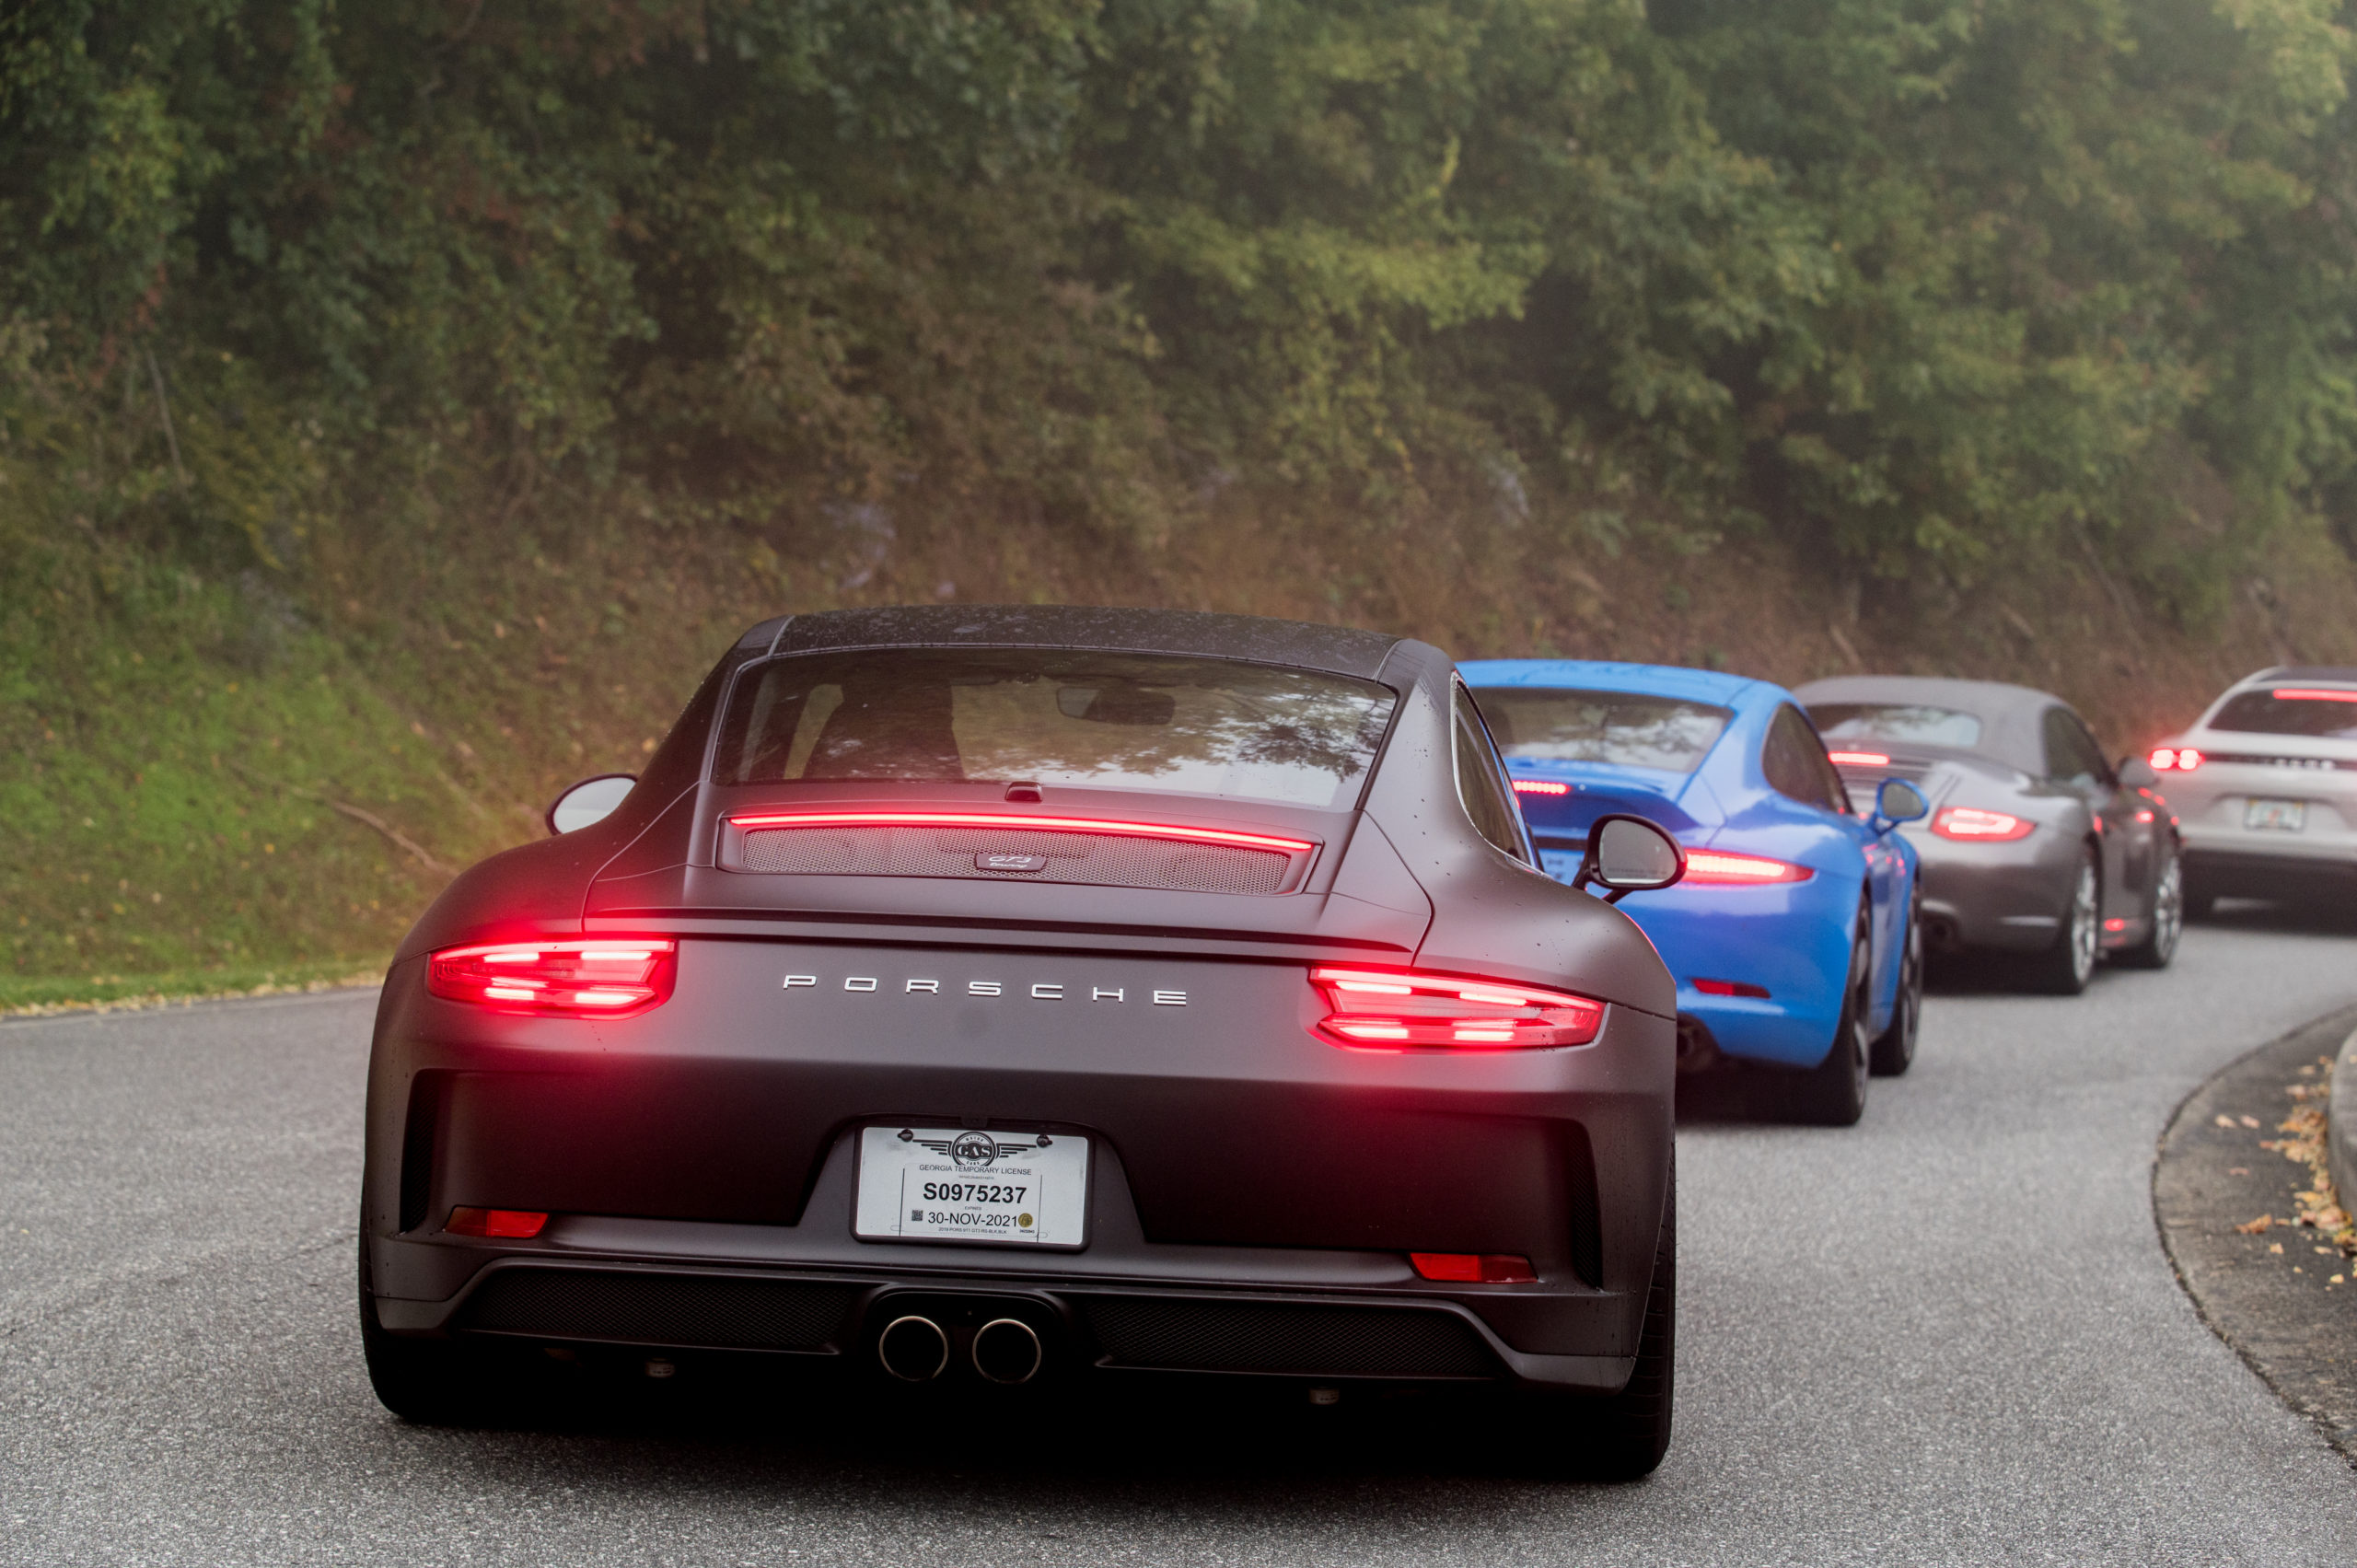 Porsche 911 GT3 behind a GTS coupe and cabriolet.